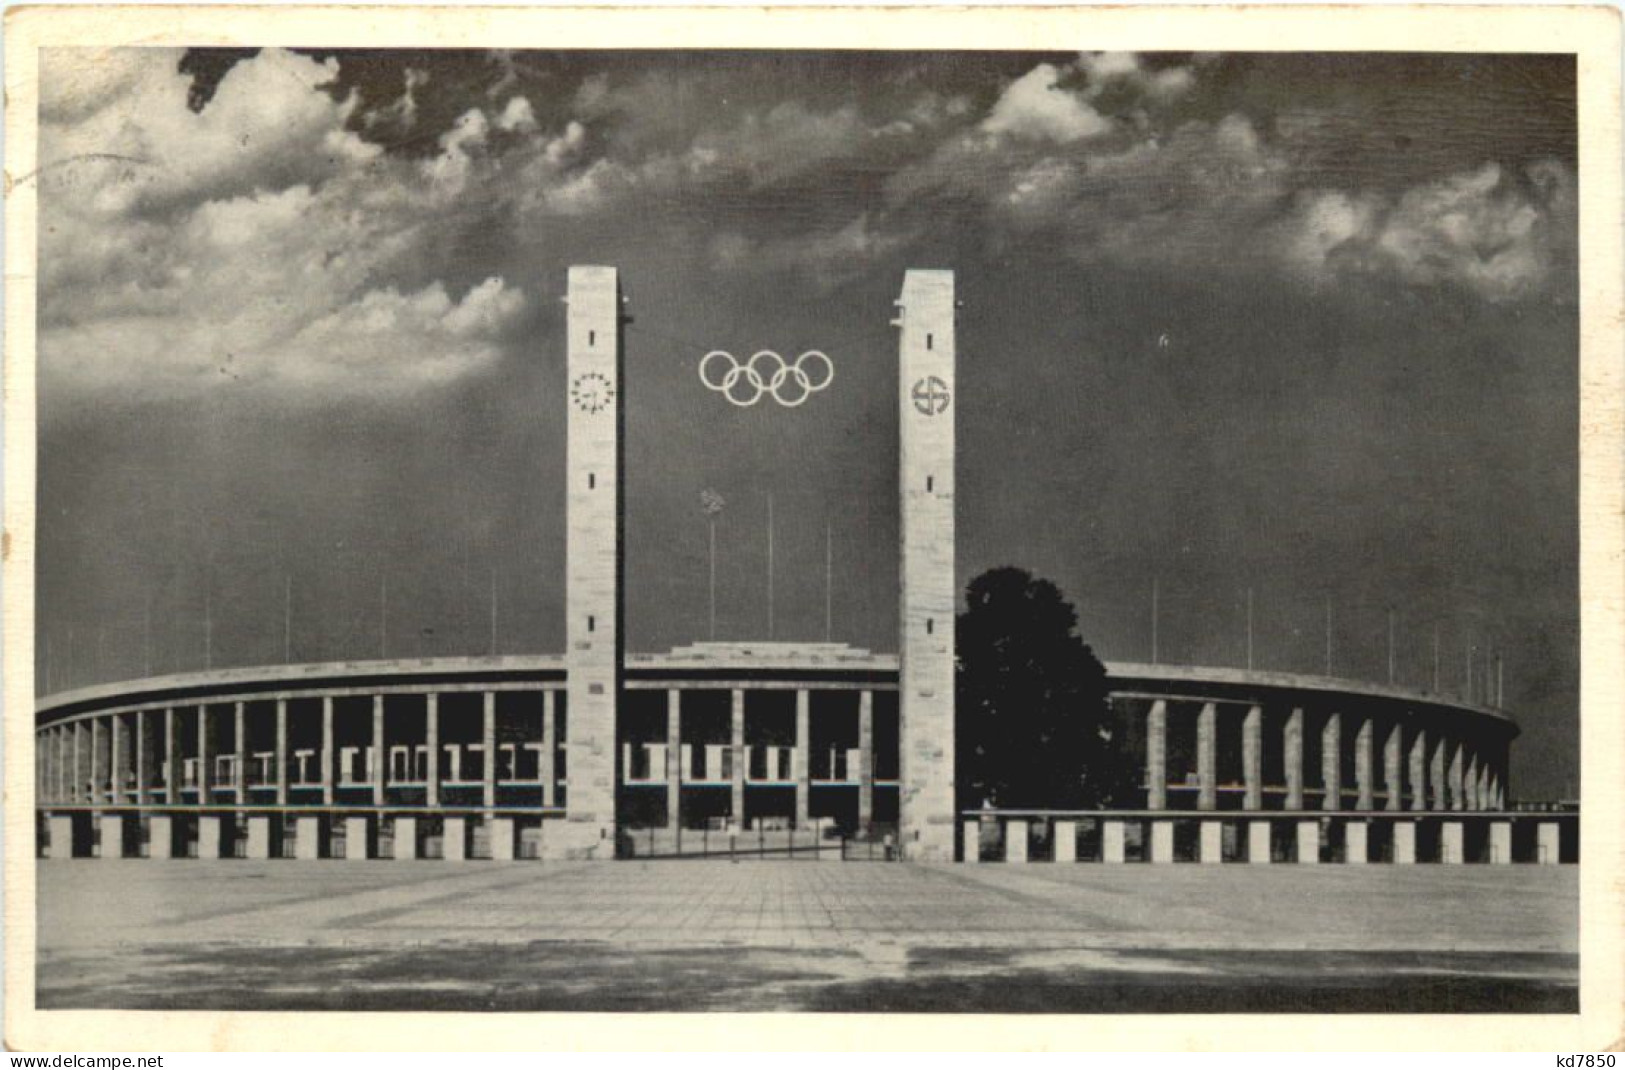 Olympische Spiele 1936 Berlin - Jeux Olympiques